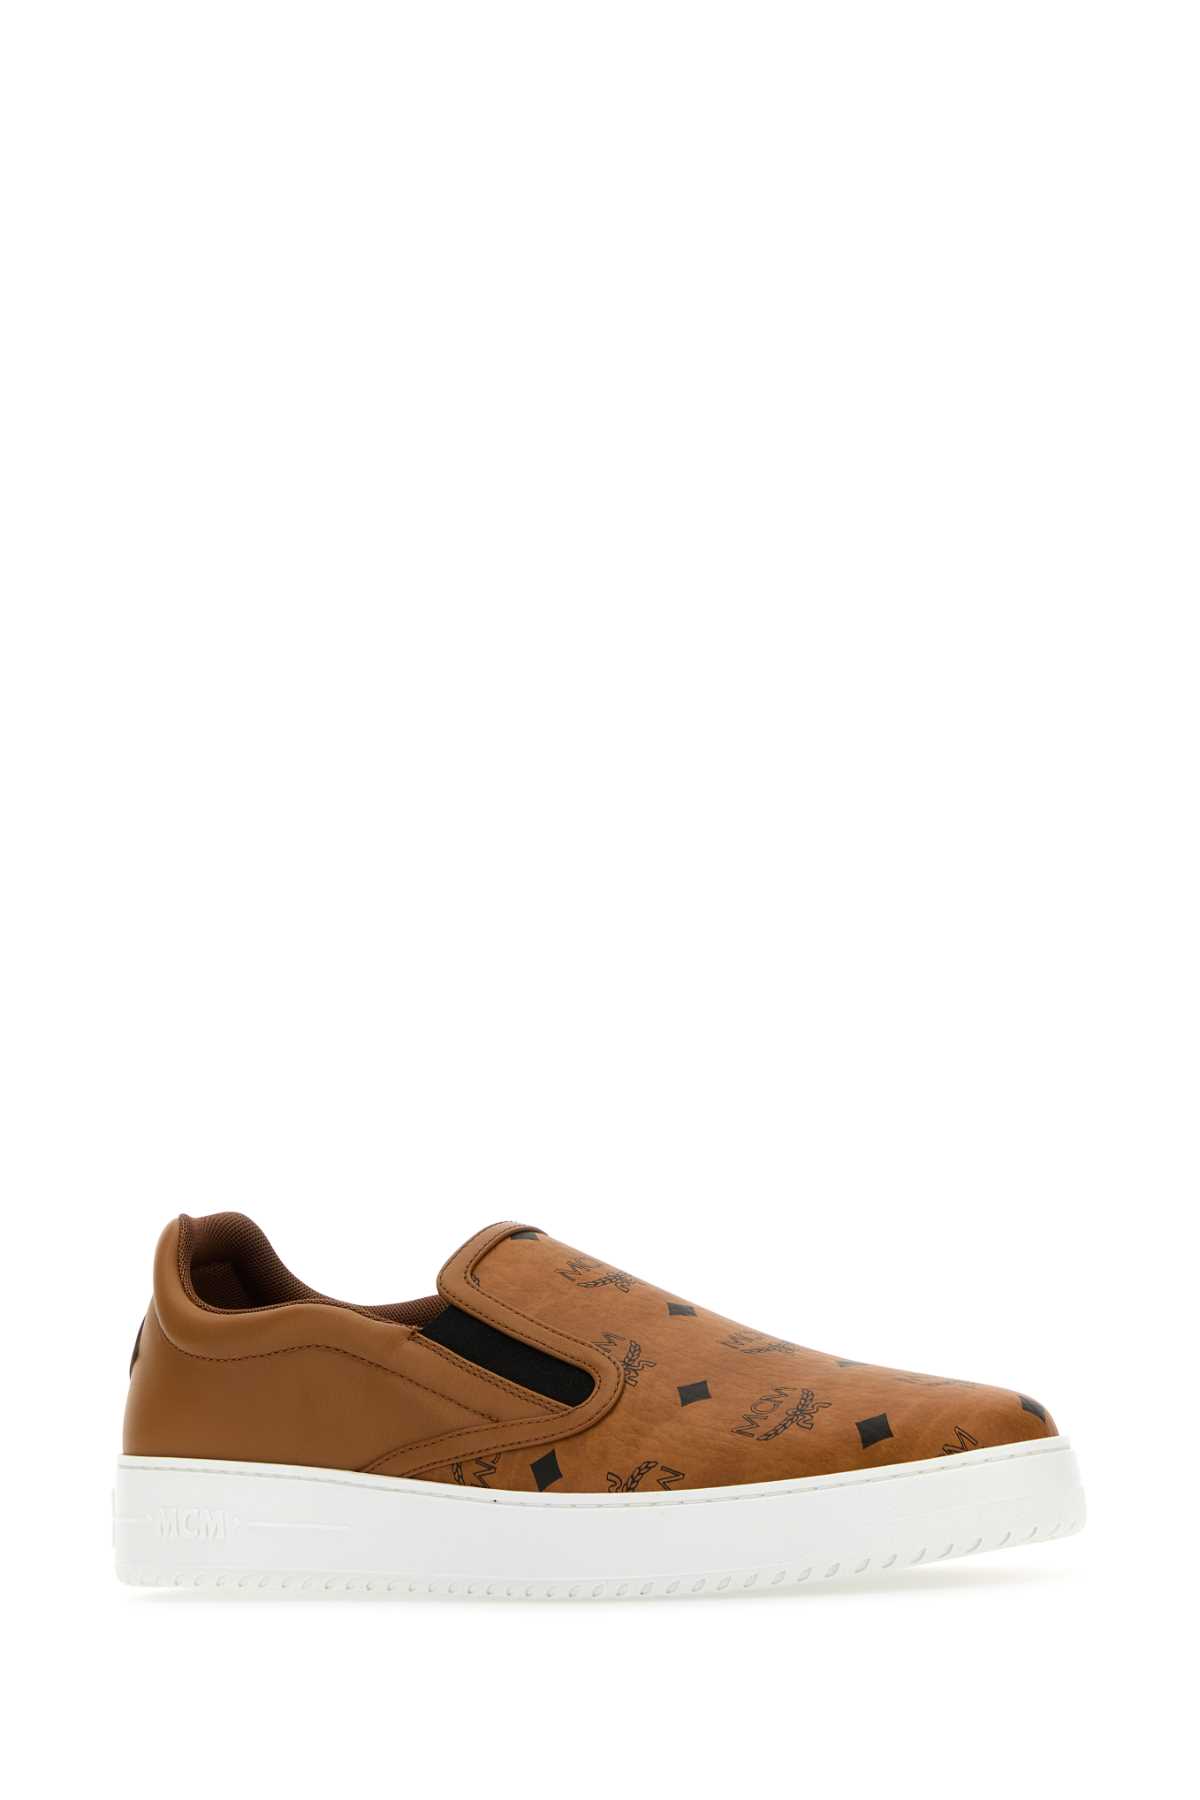 Shop Mcm Caramel Canvas And Leather Terrain Slip Ons In Cognac